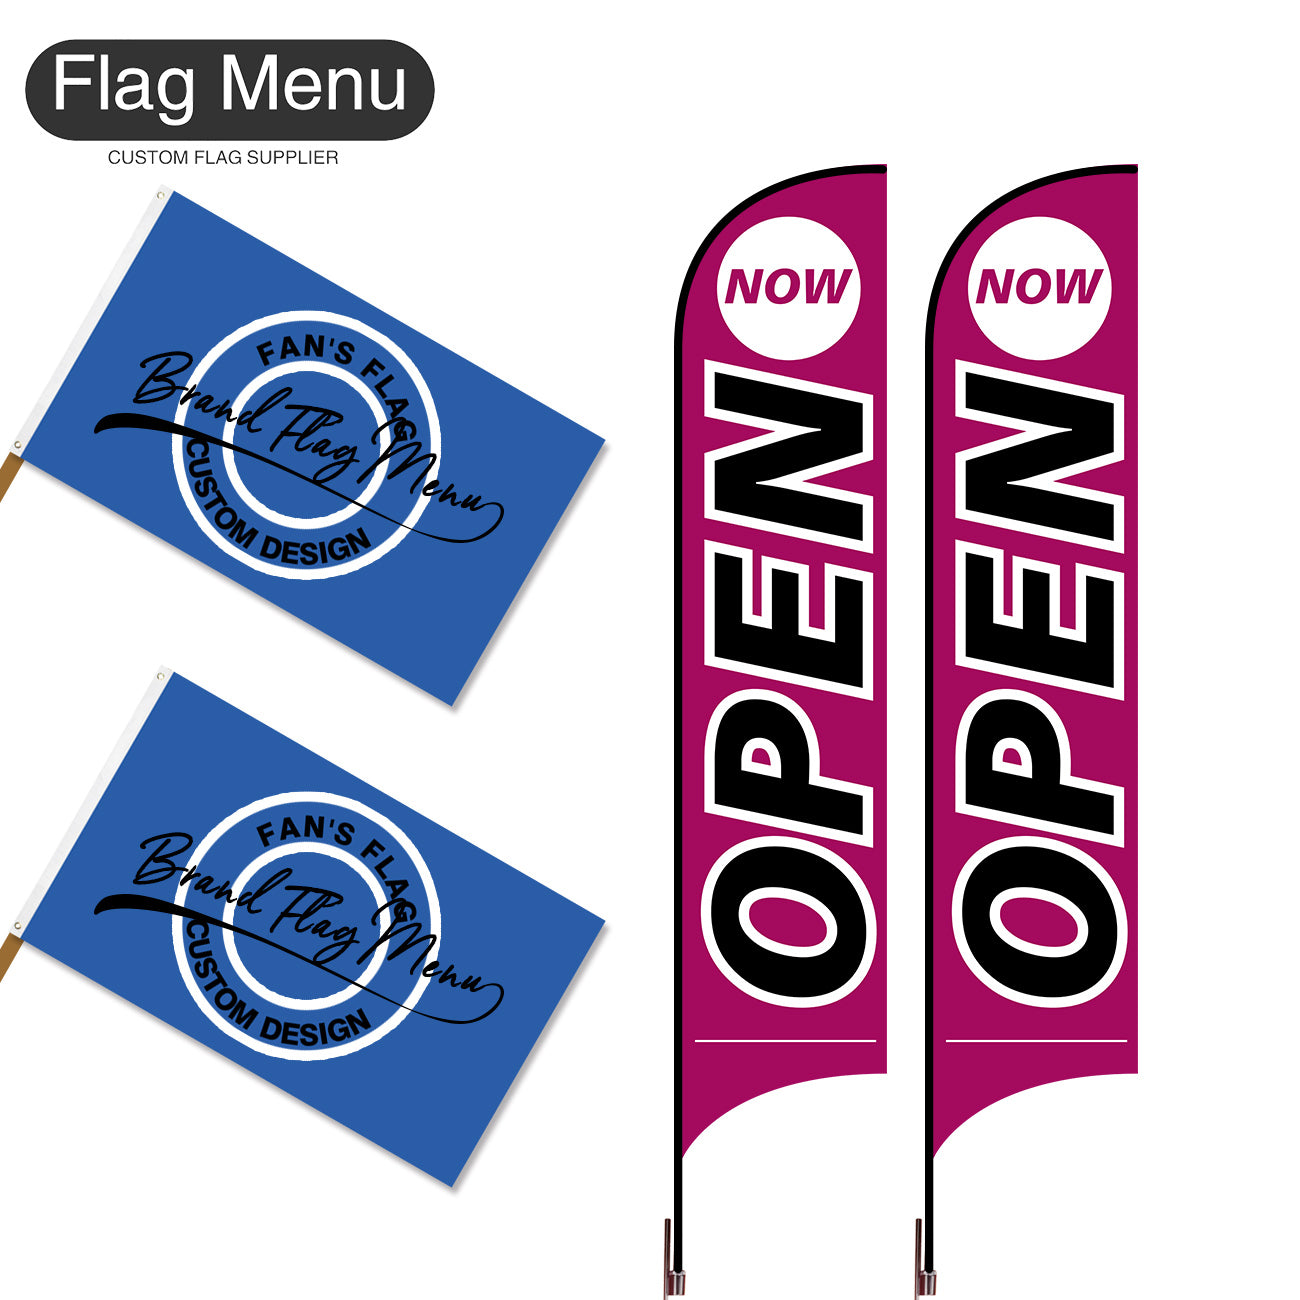 Outdoor Advertising Set - B-Wine-S - Feather Flag -Double Sided & 3'x5' Regular Flag -Single Sided-Cross & Water Bag-Flag Menu